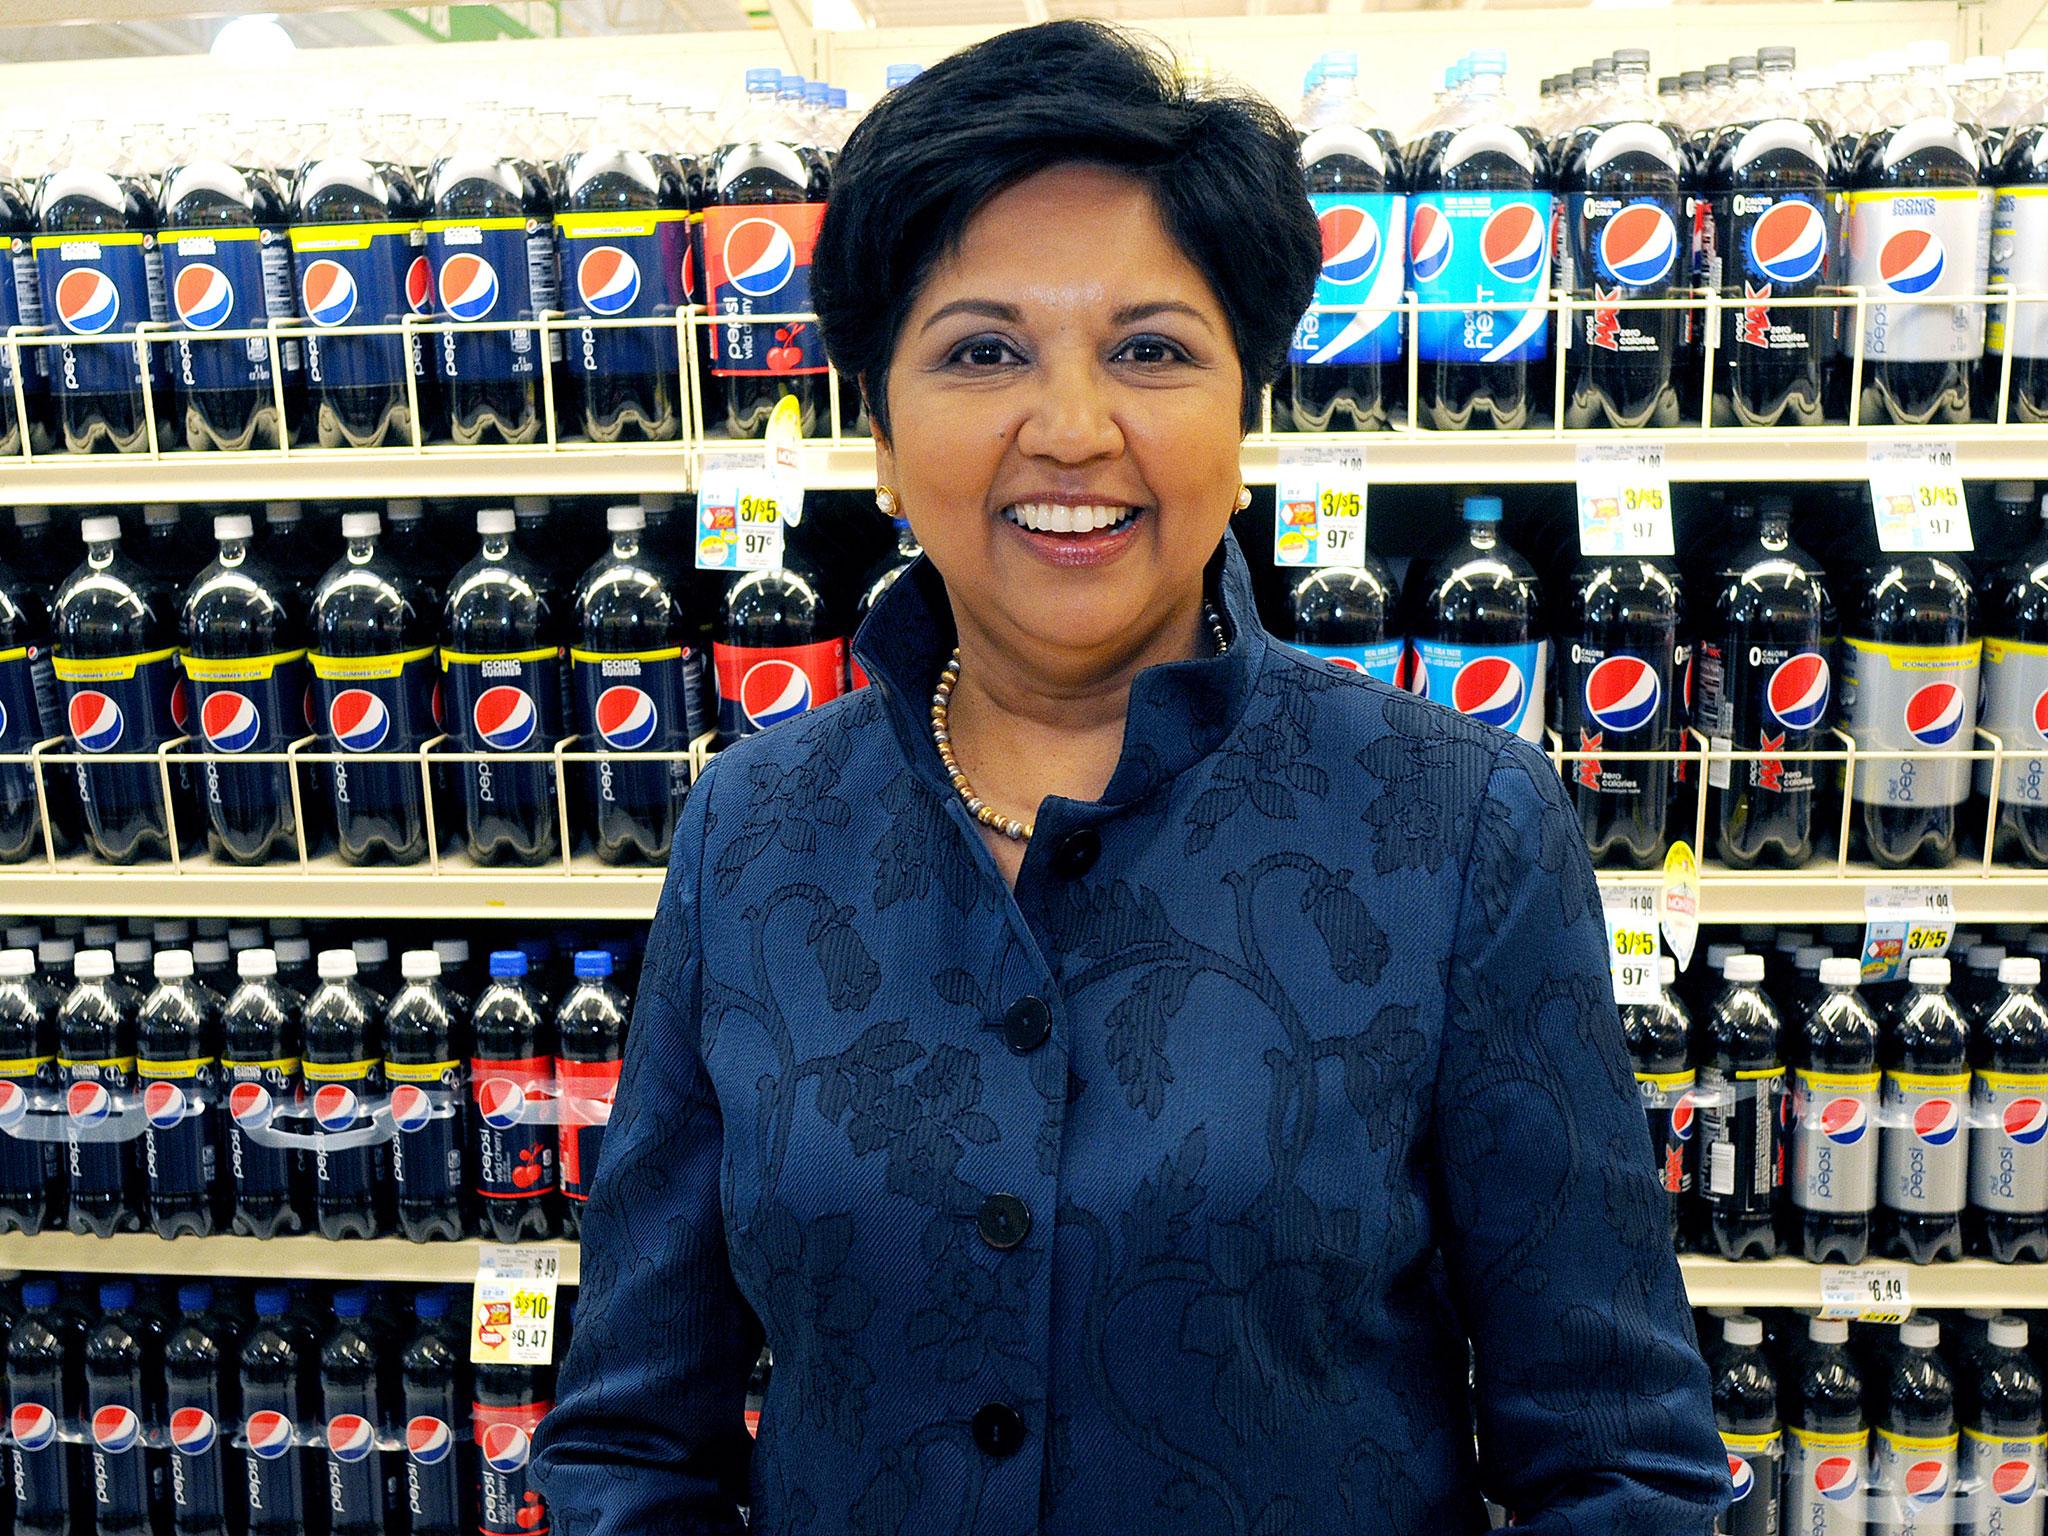 PepsiCo CEO and chairman Indra Nooyi is the only Indian-origin woman in Fortune's 51 Most Powerful Women list 